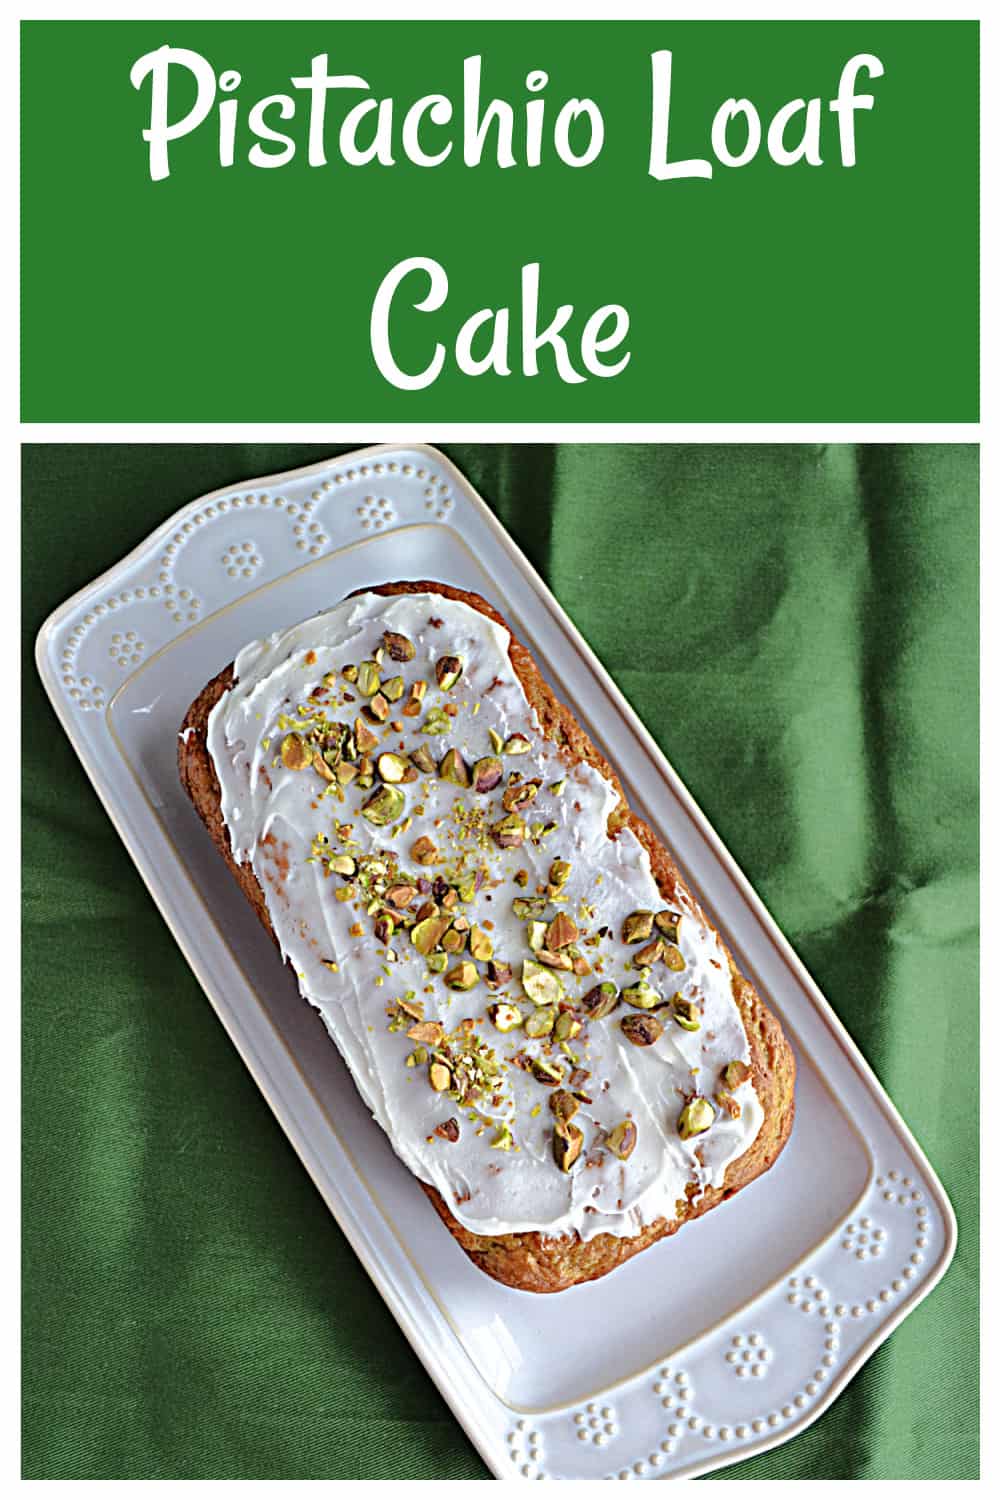 Pin Image: Text title, a pistachio loaf cake on a platter.